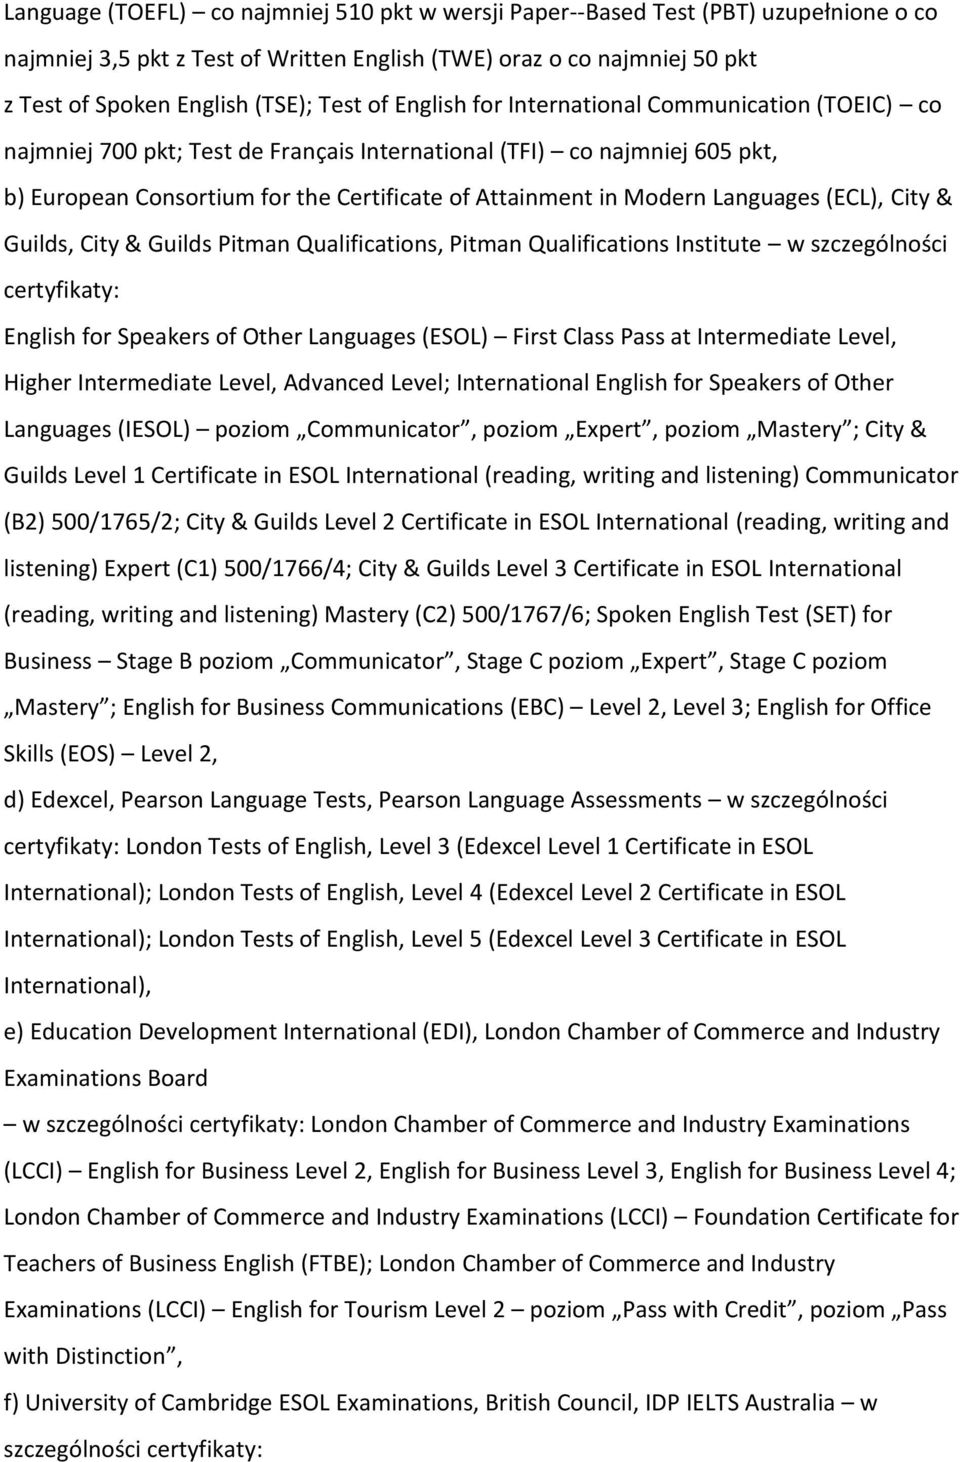 Languages (ECL), City & Guilds, City & Guilds Pitman Qualifications, Pitman Qualifications Institute w szczególności certyfikaty: English for Speakers of Other Languages (ESOL) First Class Pass at